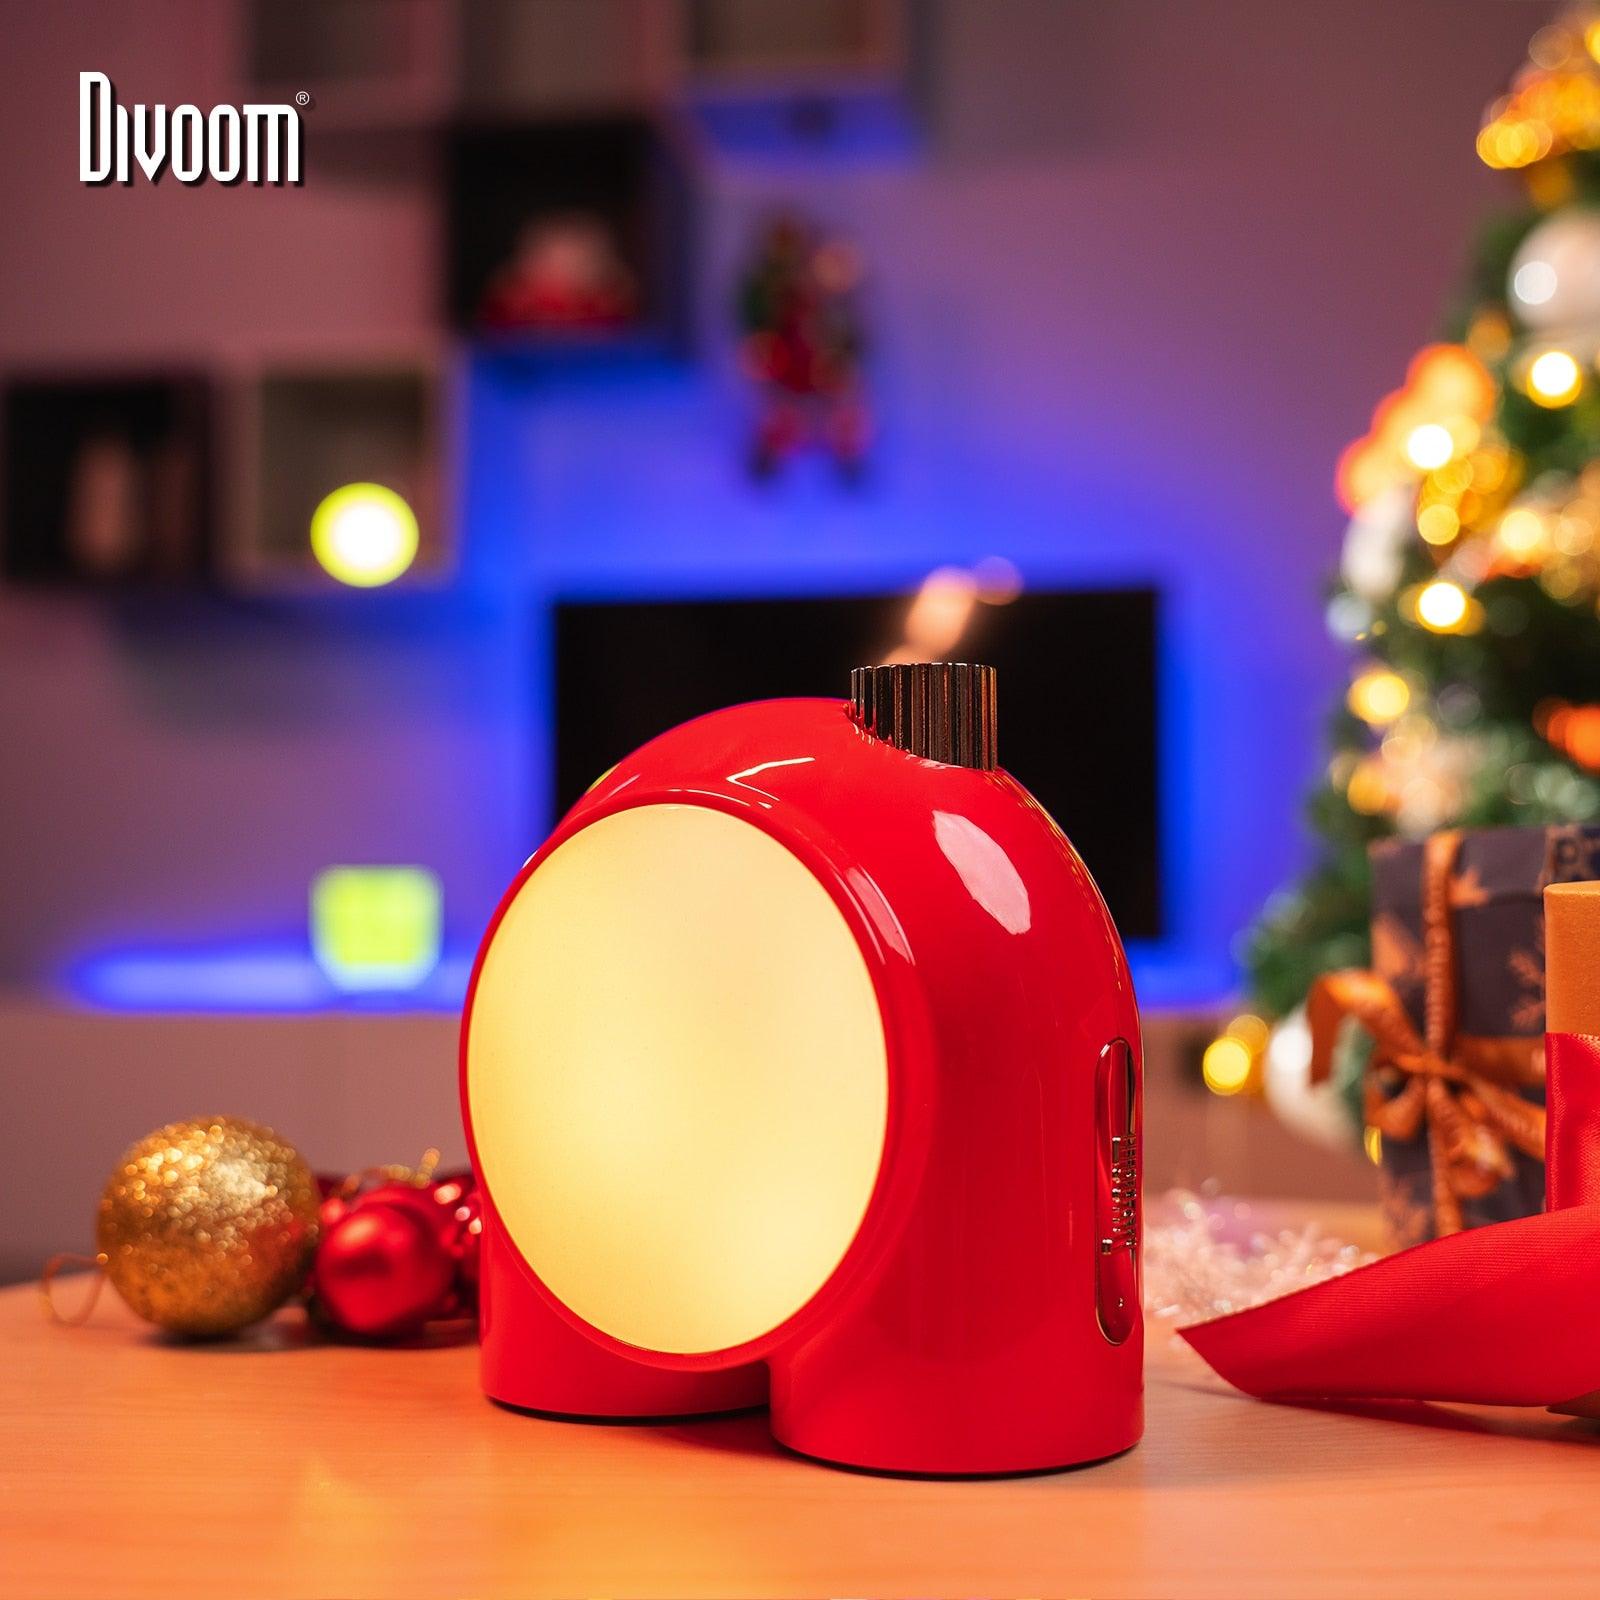 Divoom Planet-9 Bedside Music Lamp - Decorative and Functional RGB LED Lighting